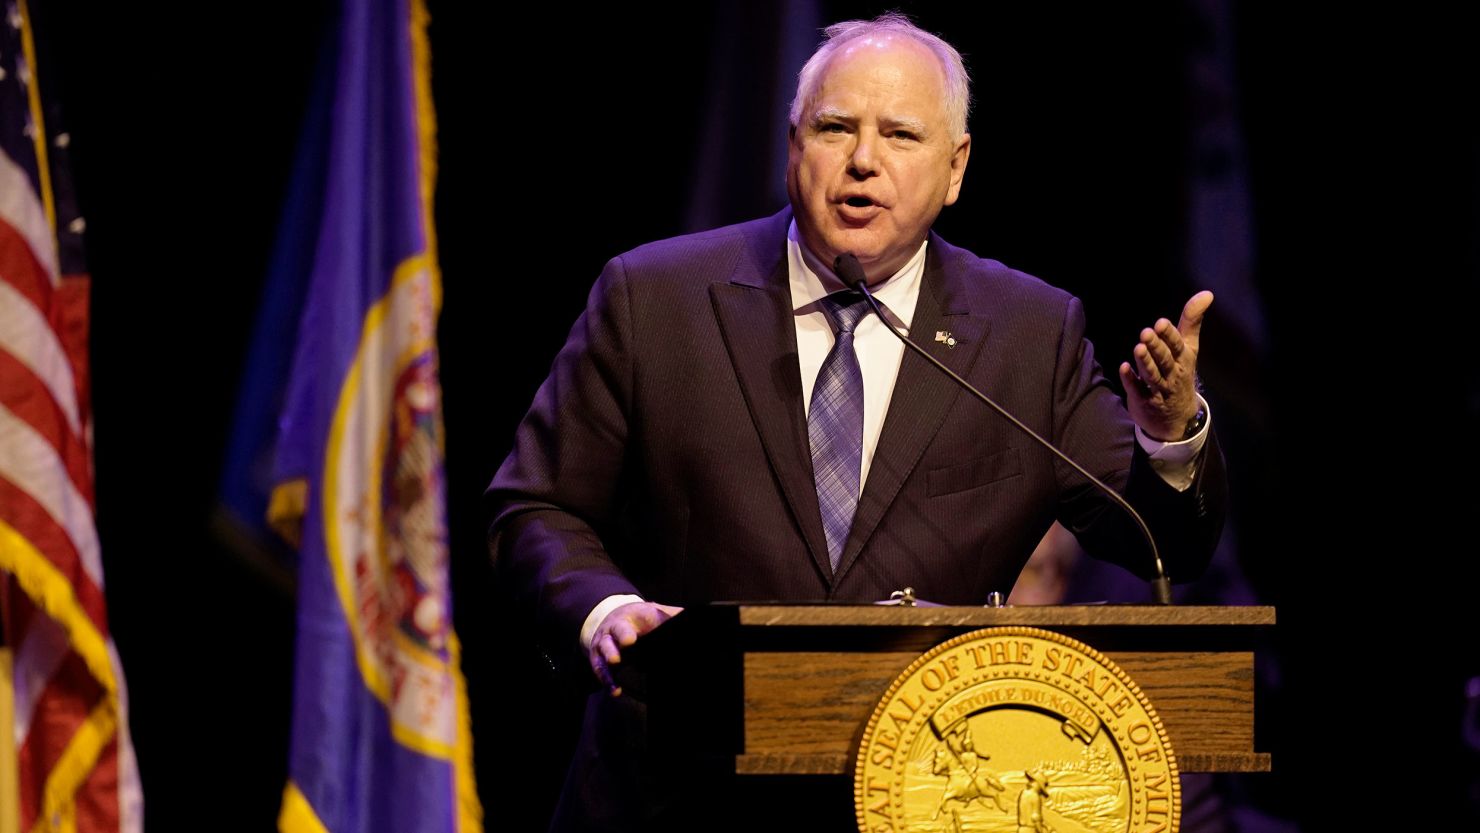 Minnesota Gov. Tim Walz delivers a speech after being sworn in for his second term during his inauguration on Monday, January 2, 2023, in St. Paul.